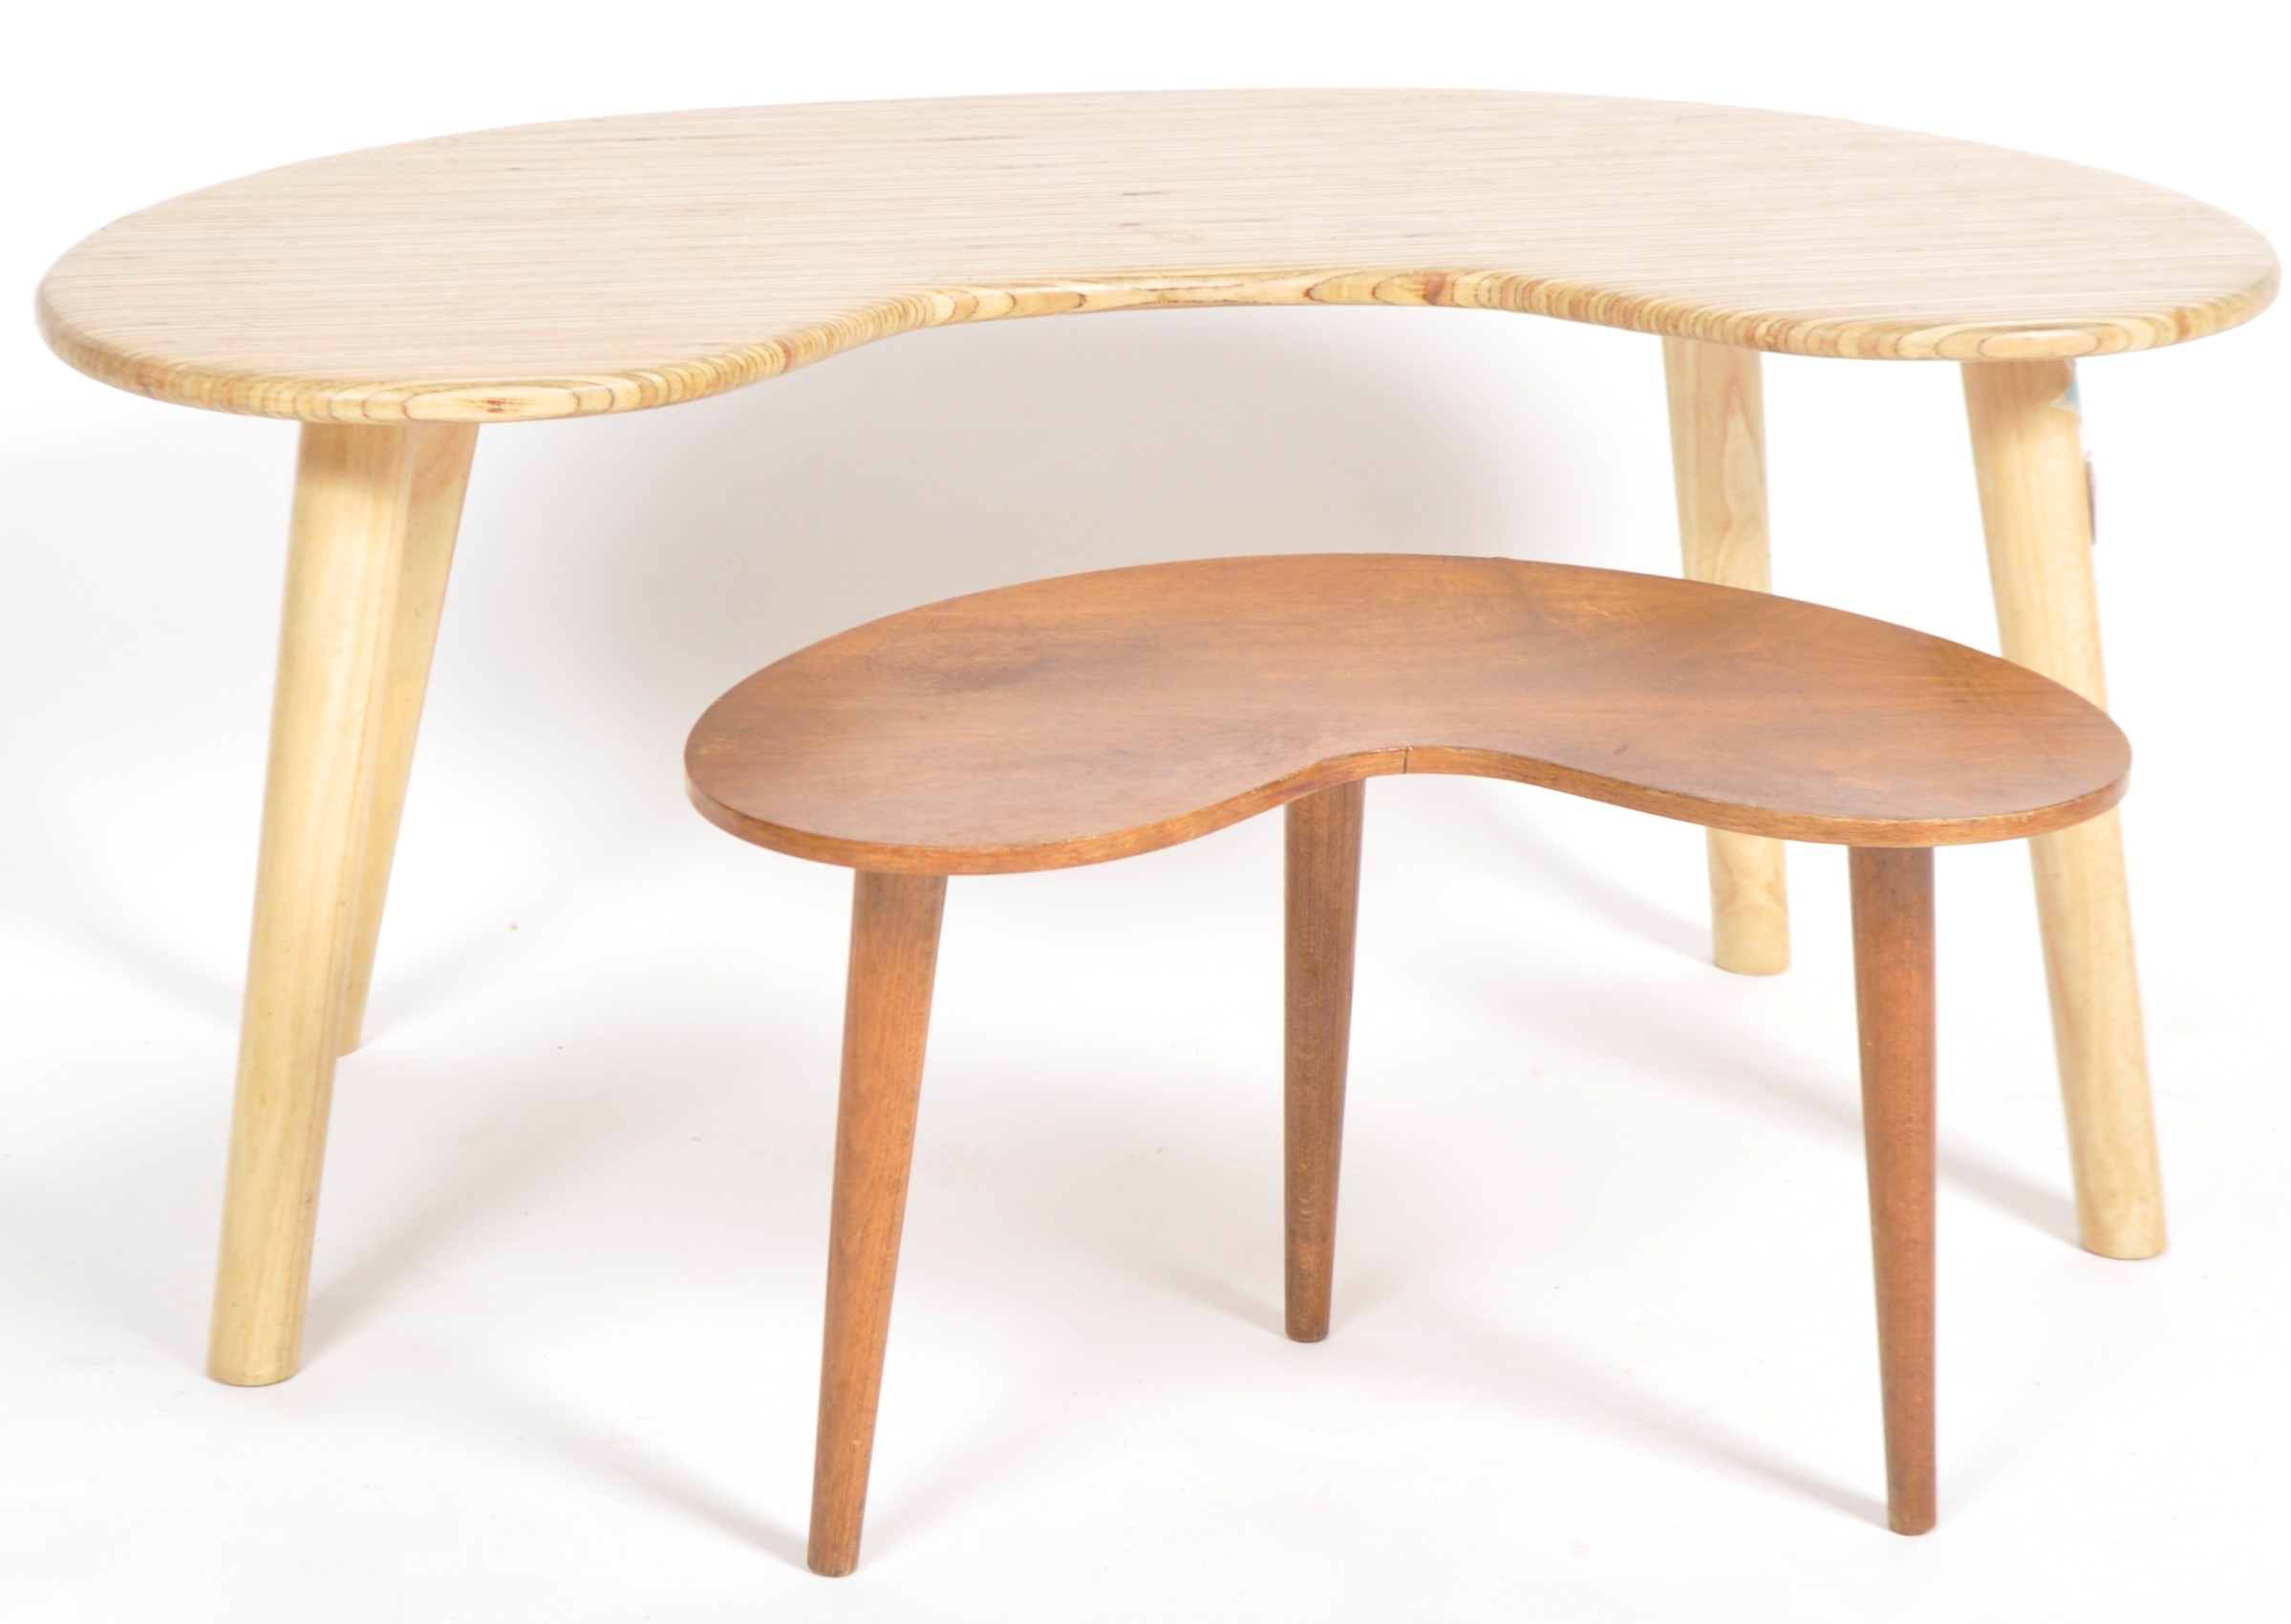 PAIR OF RETRO KIDNEY SHAPED LOW TABLE - Image 2 of 5